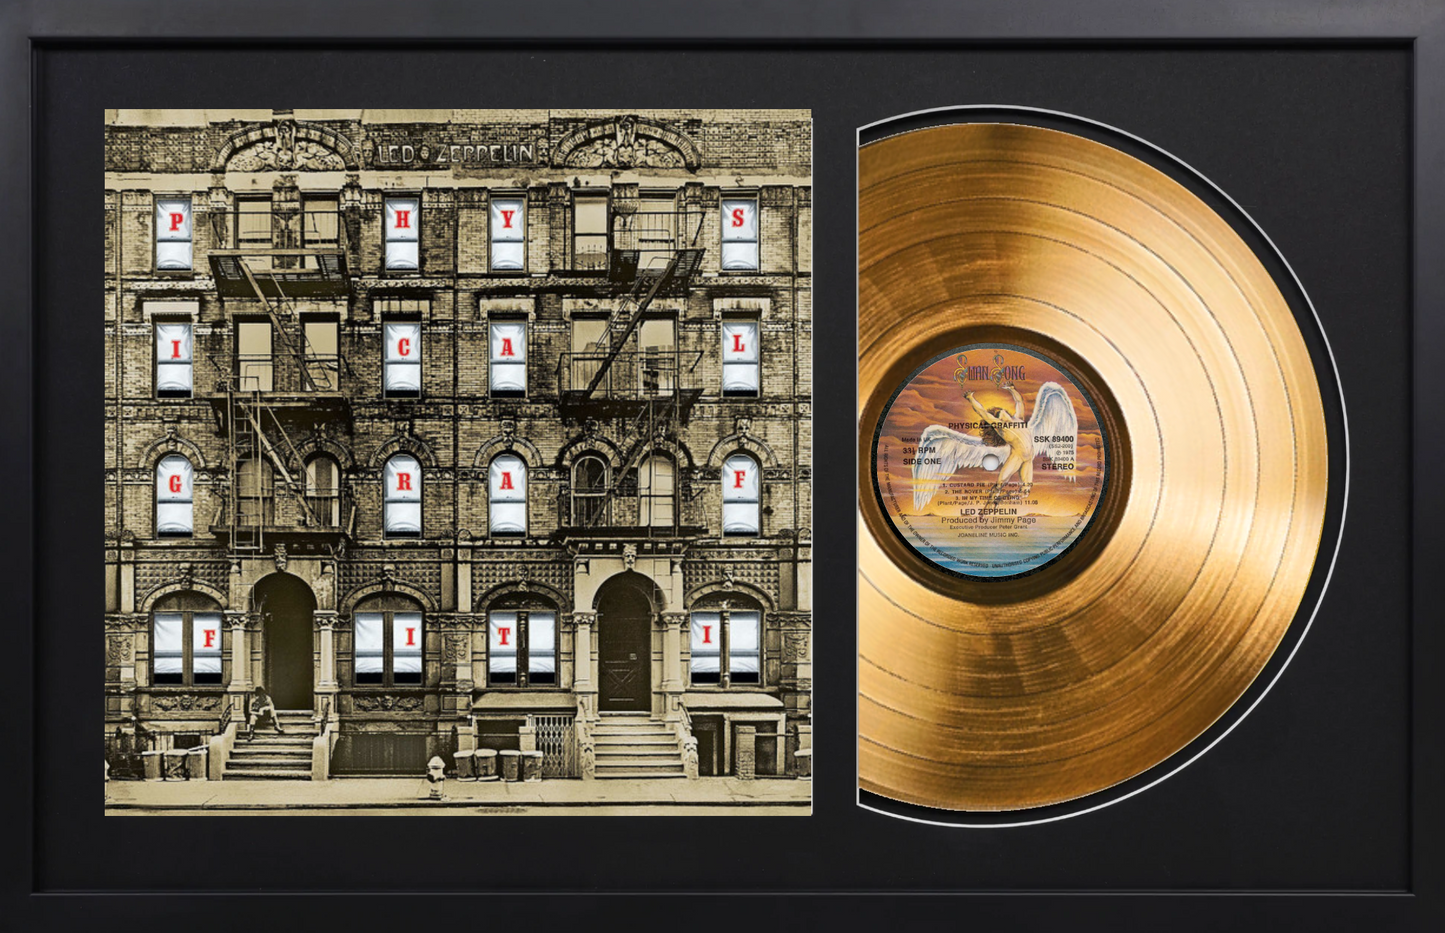 Led Zeppelin - Physical Grafitti - 14K Gold Plated, Limited Edition Album